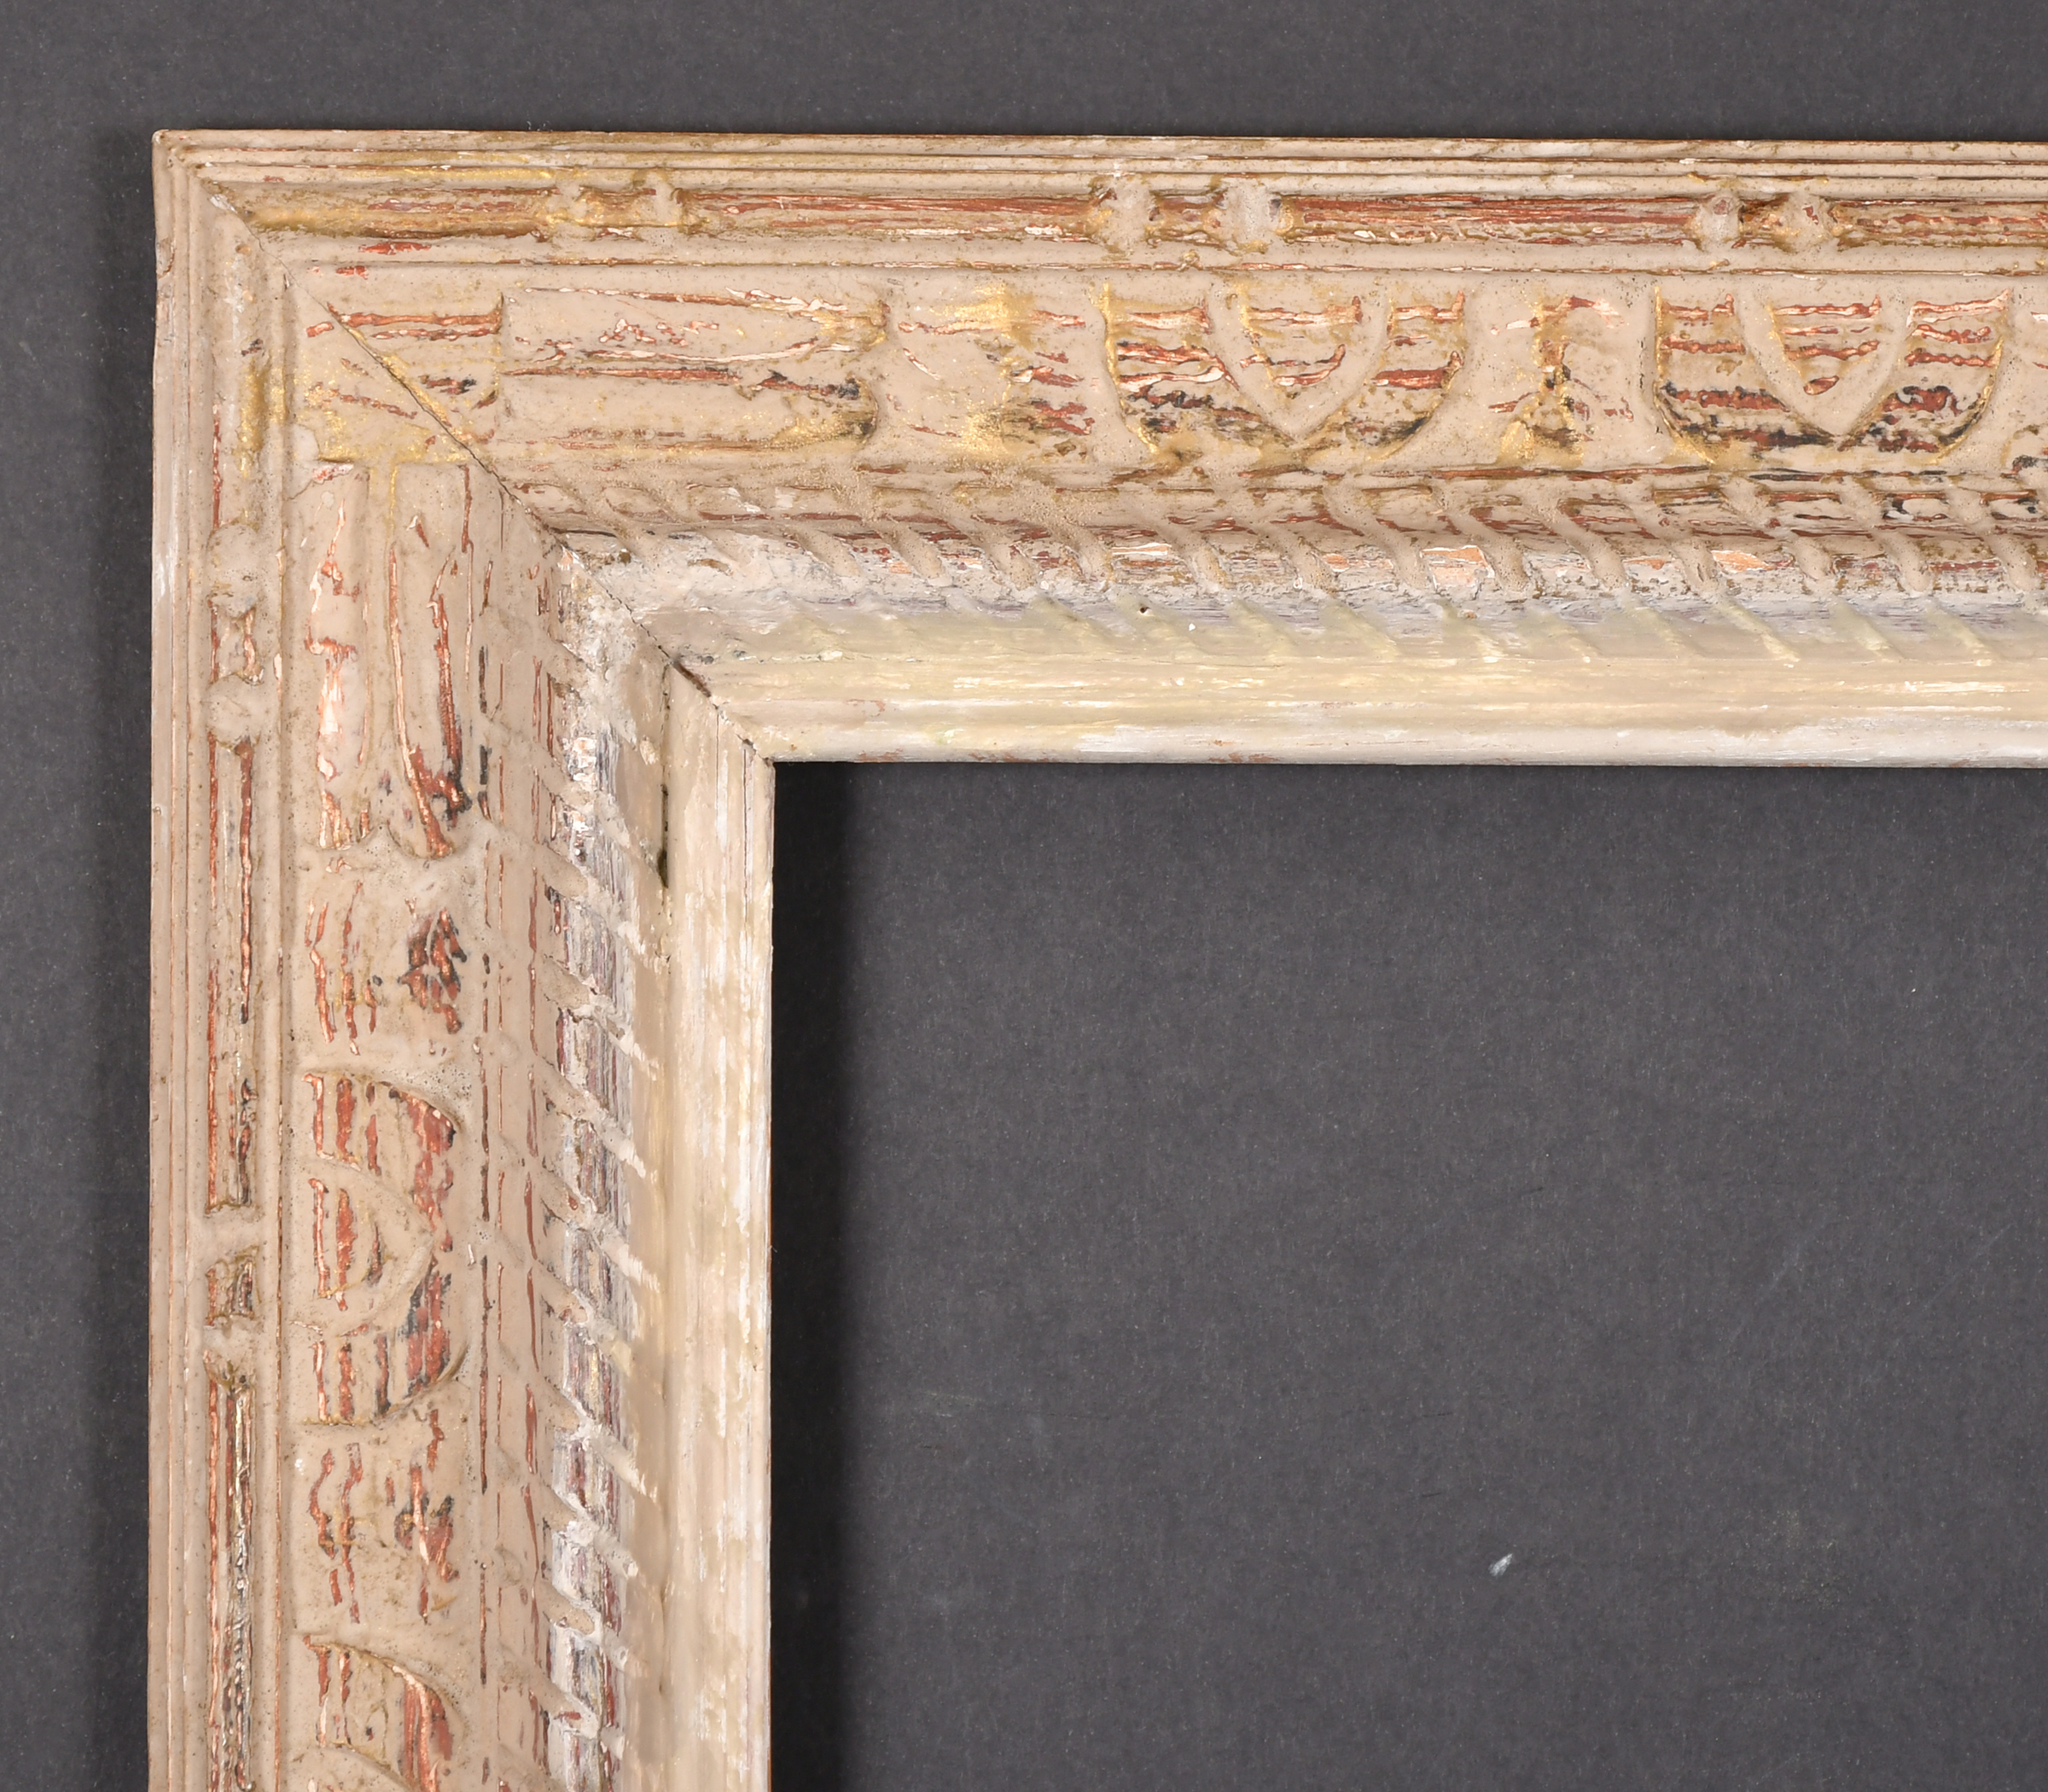 20th Century French School. A Painted Carved Wood Frame, rebate 20.5" x 16.5" (52.1 x 41.9cm)